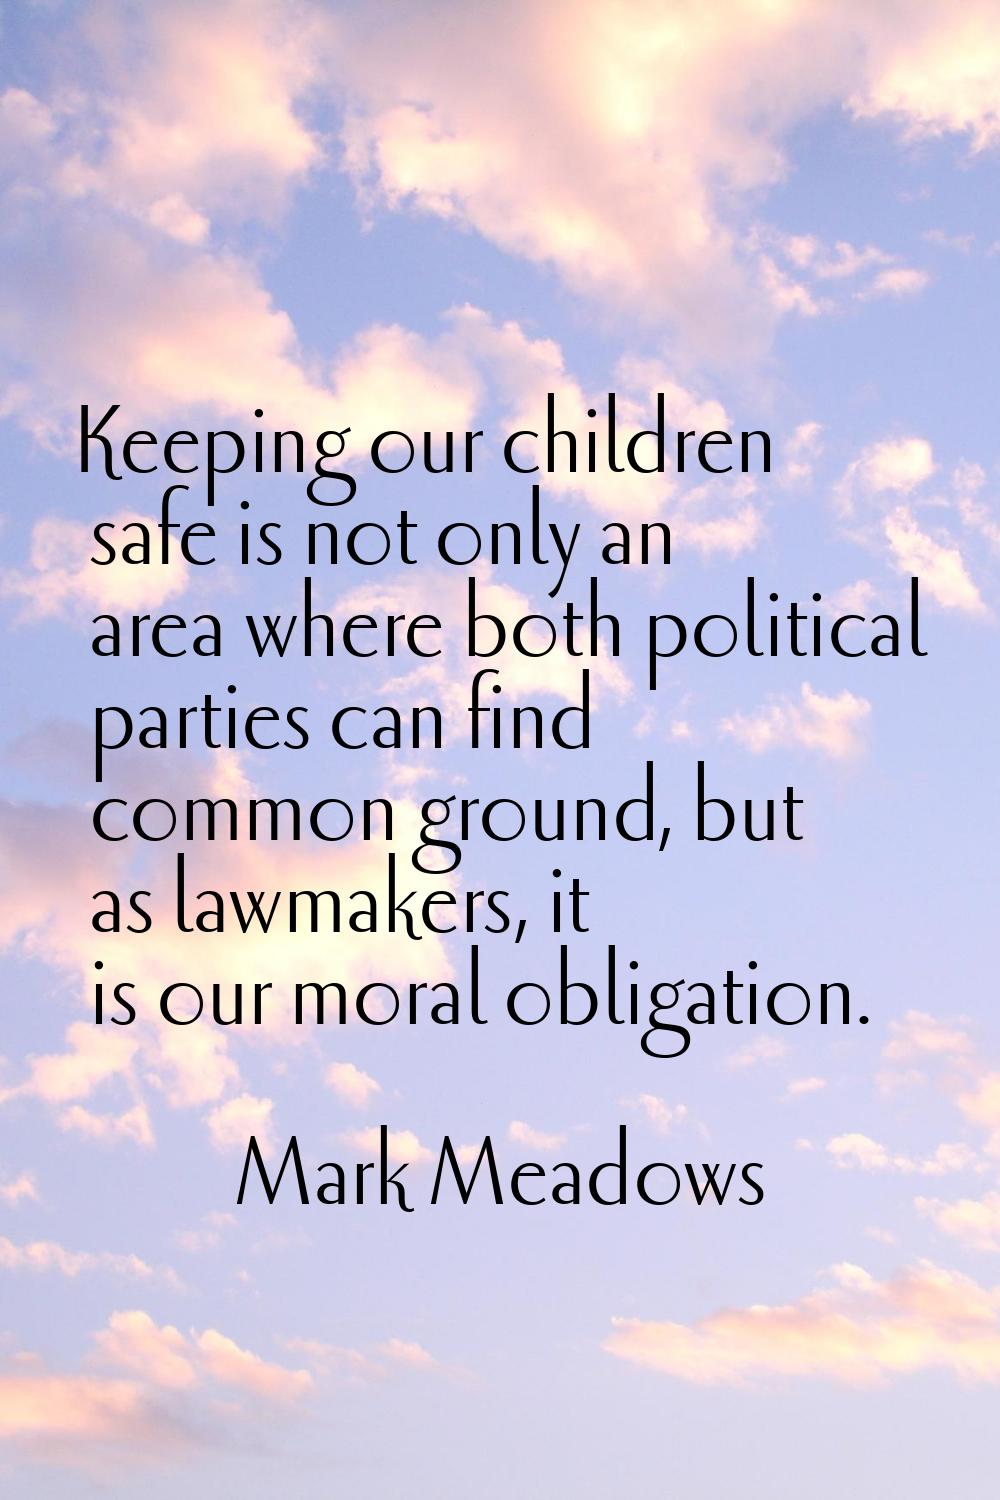 Keeping our children safe is not only an area where both political parties can find common ground, 